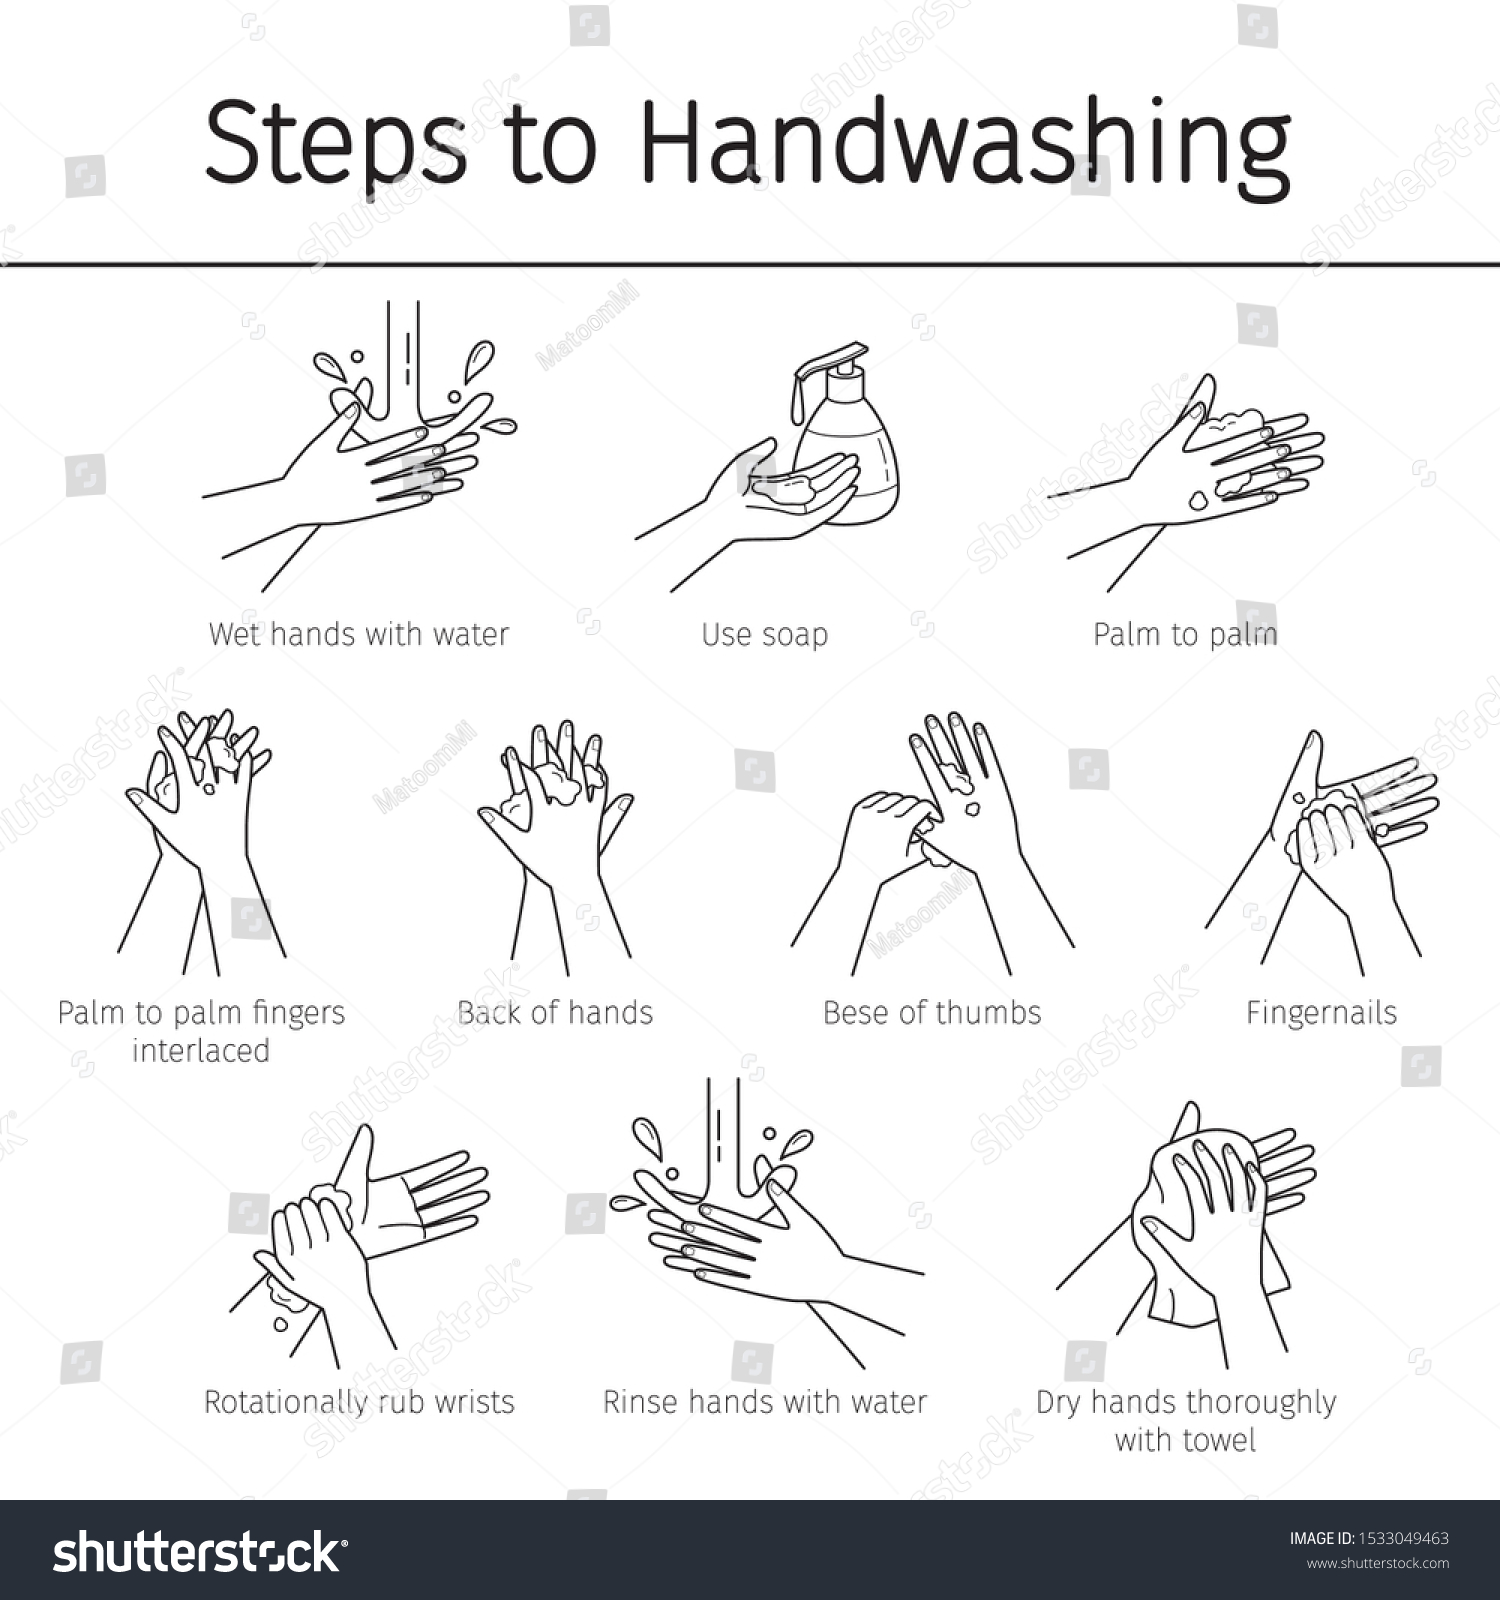 Steps To Hand Washing For Prevent Illness And Hygiene, Keep Your Healthy, Outline Icons, Sanitary, Infection, Sickness, Healthy #1533049463